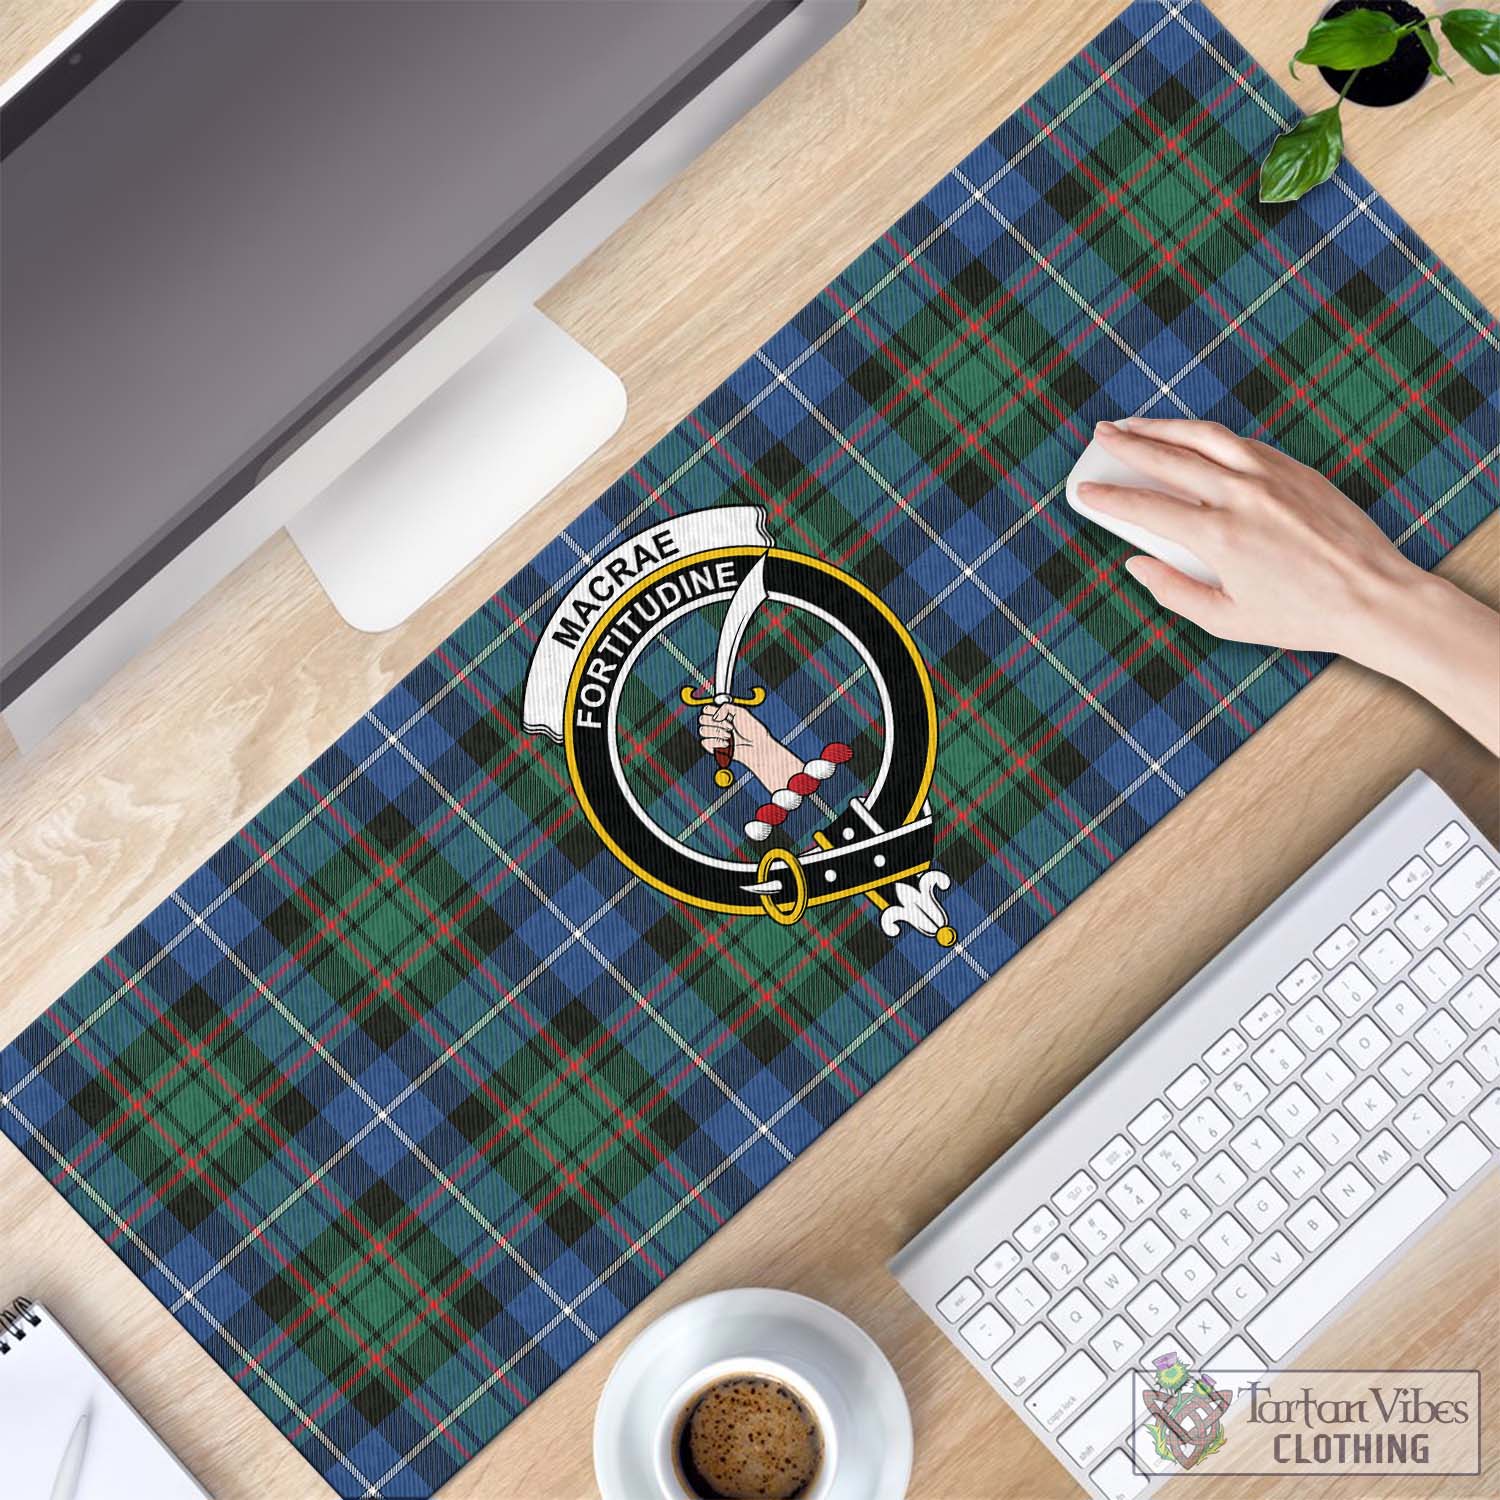 Tartan Vibes Clothing MacRae Hunting Ancient Tartan Mouse Pad with Family Crest